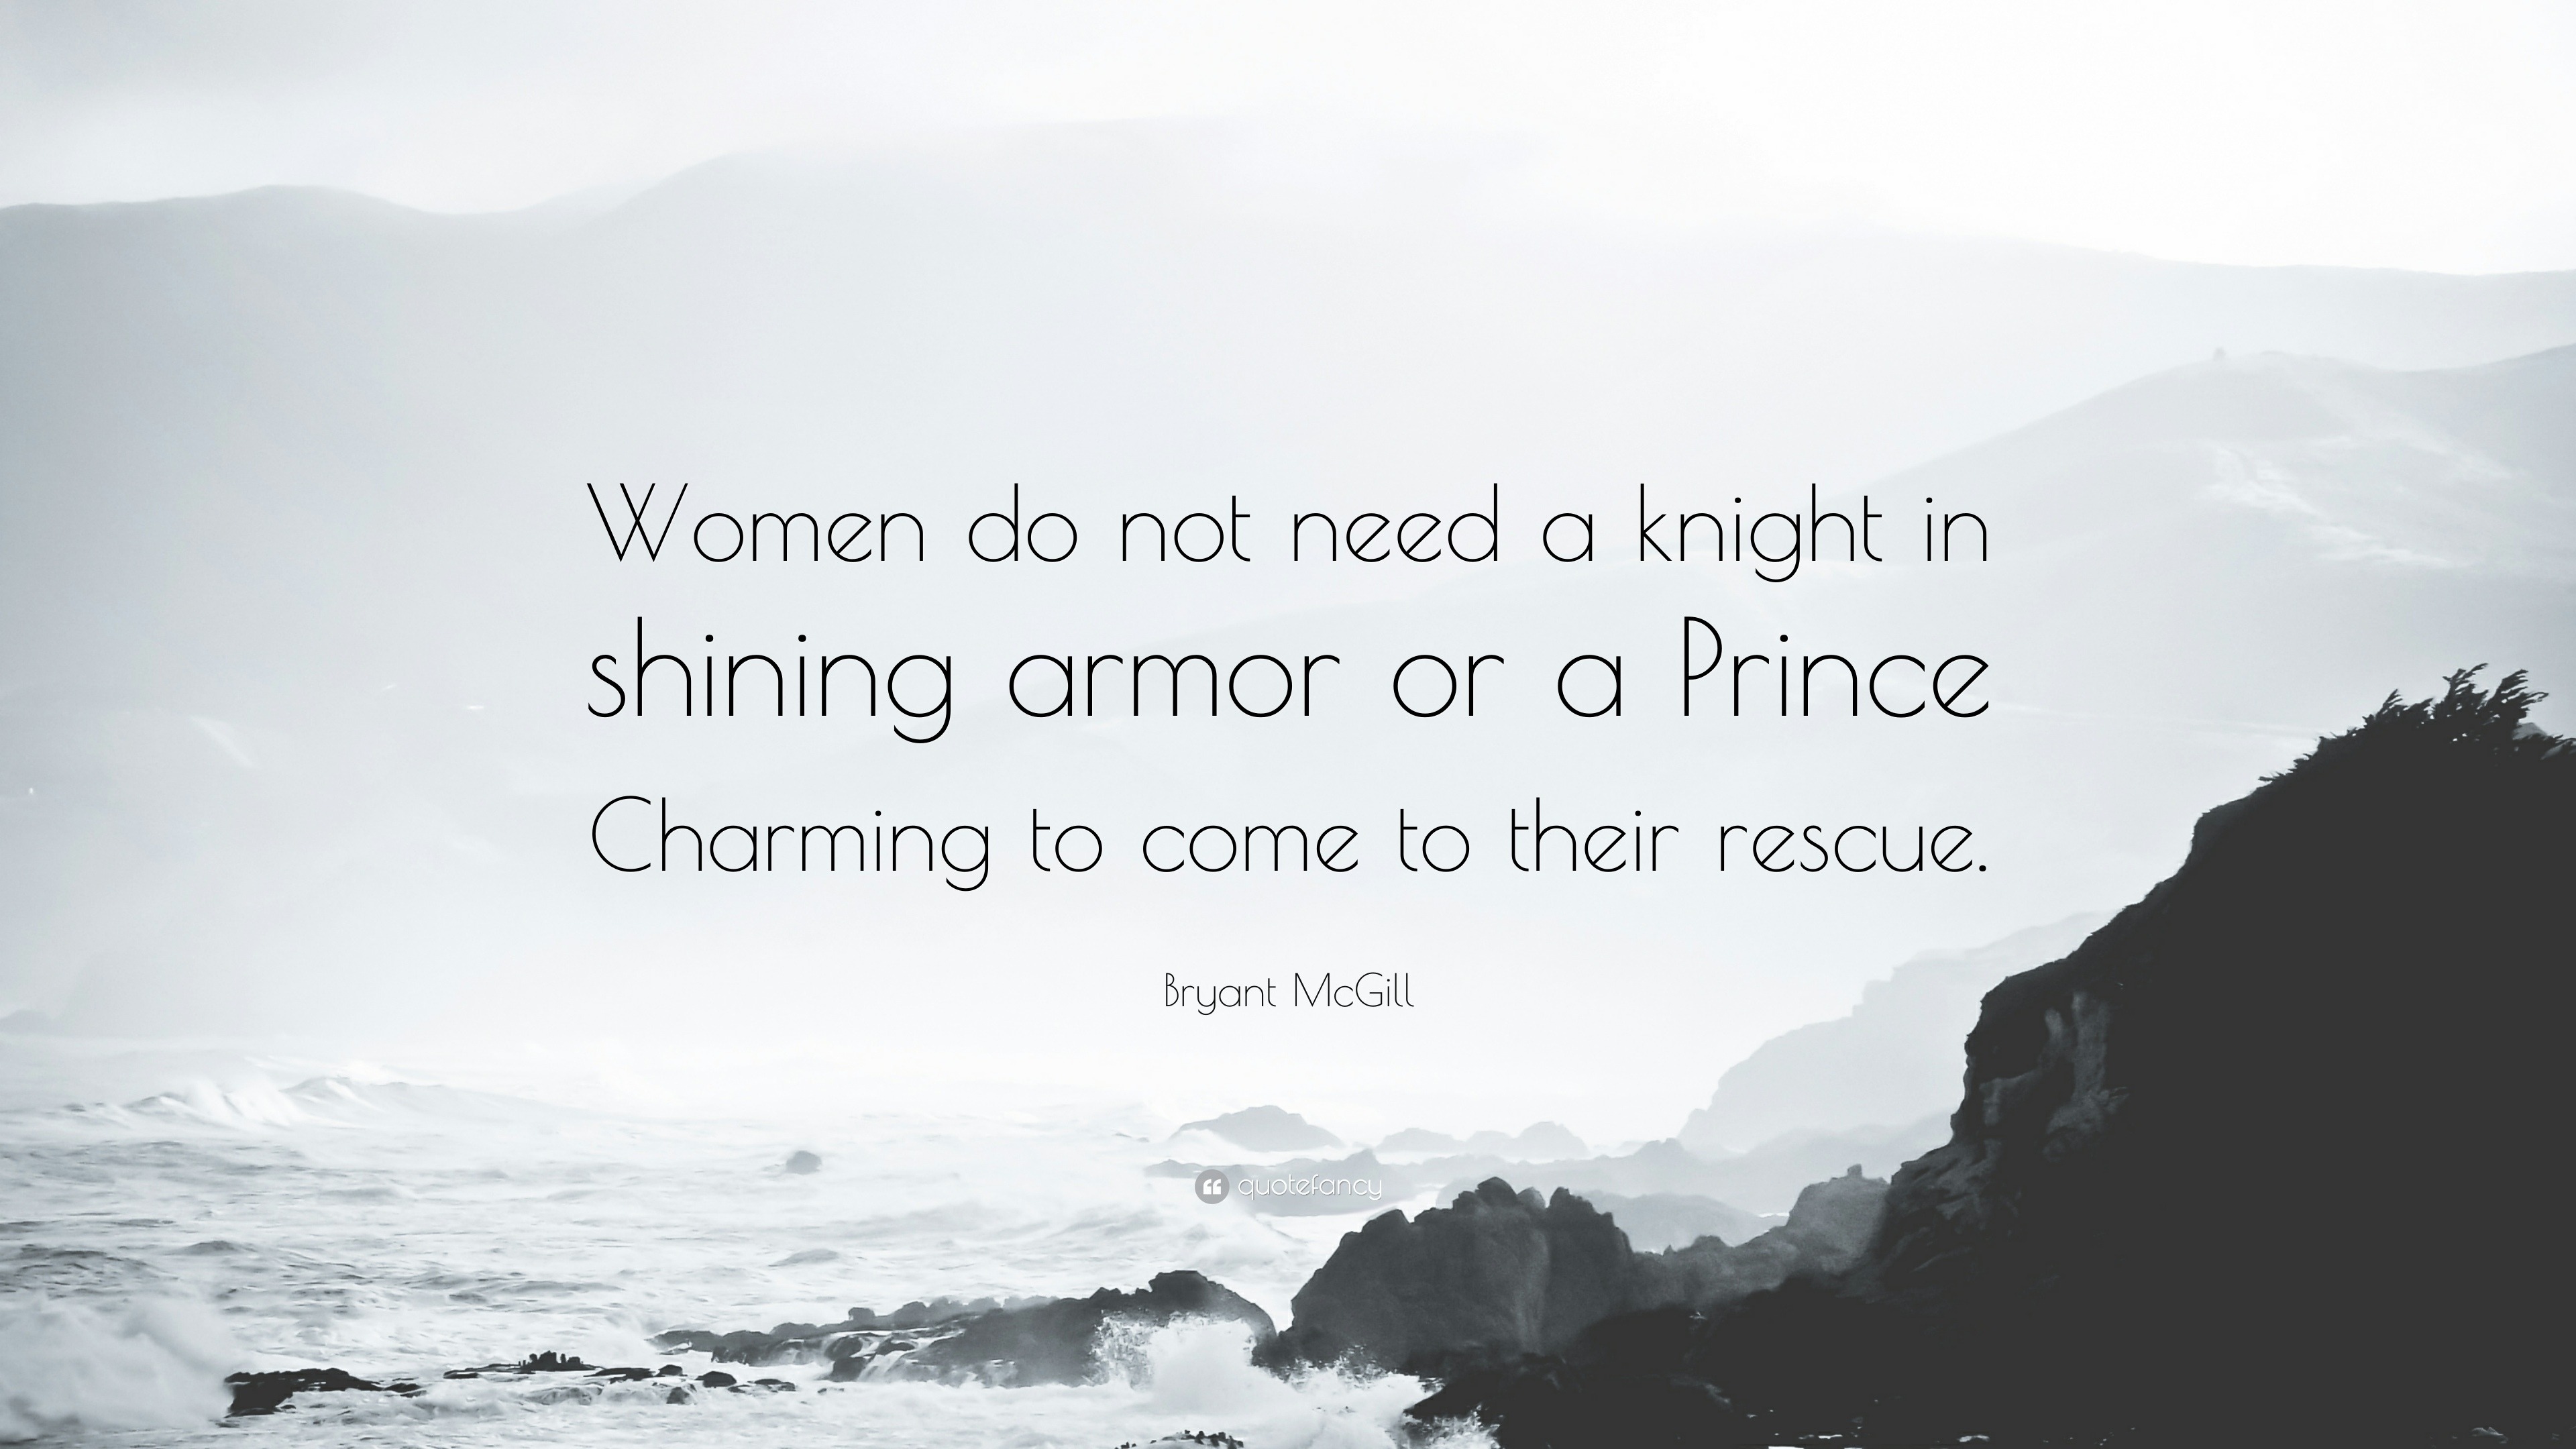 knight in shining armor quotes